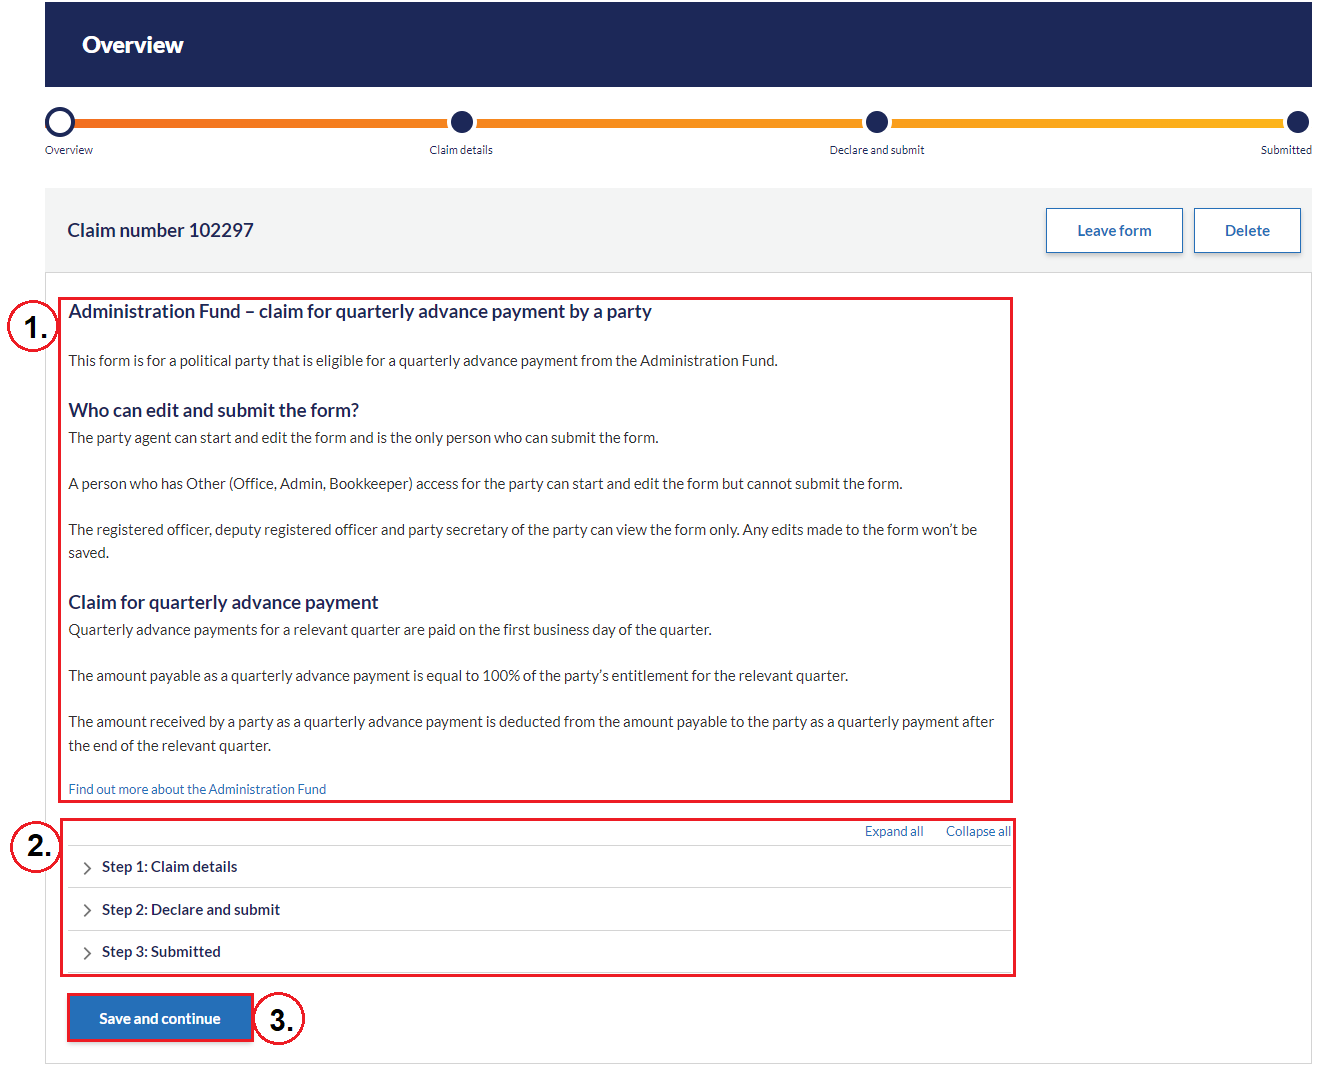 Figure 2: Claim details page for Administration Fund Advance claim form